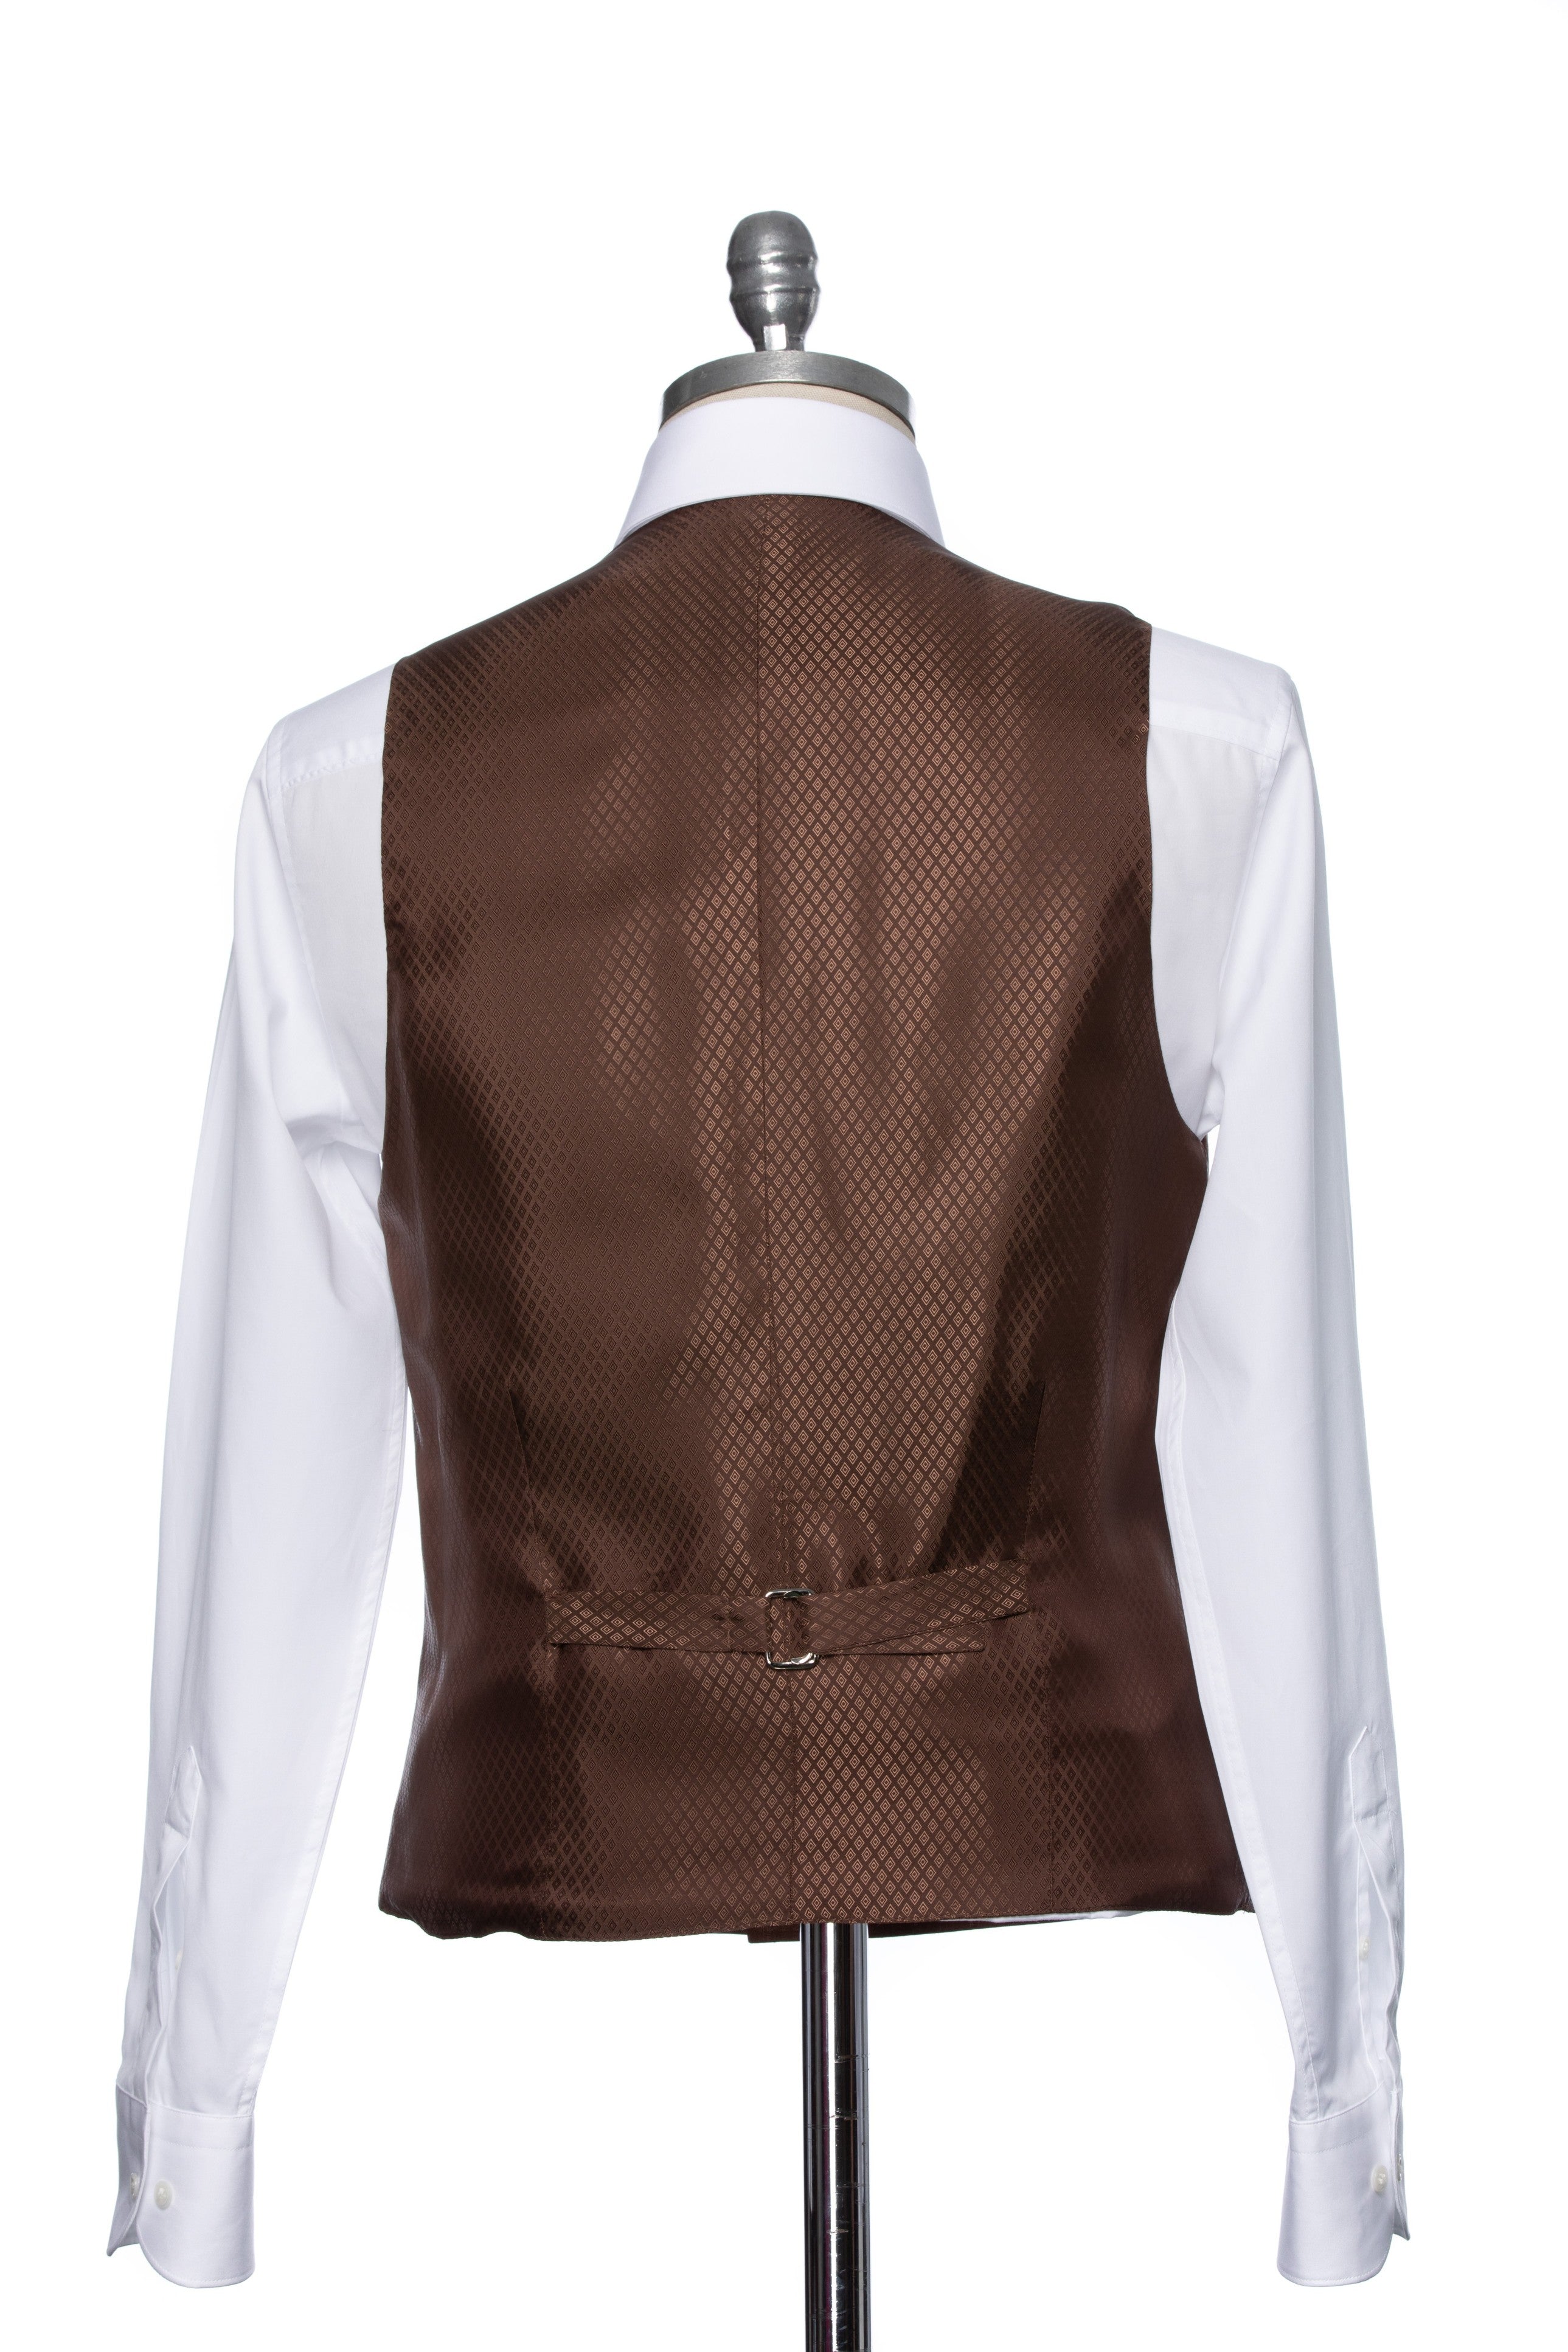 Brown Business Vest With 2 Rows Of Buttons